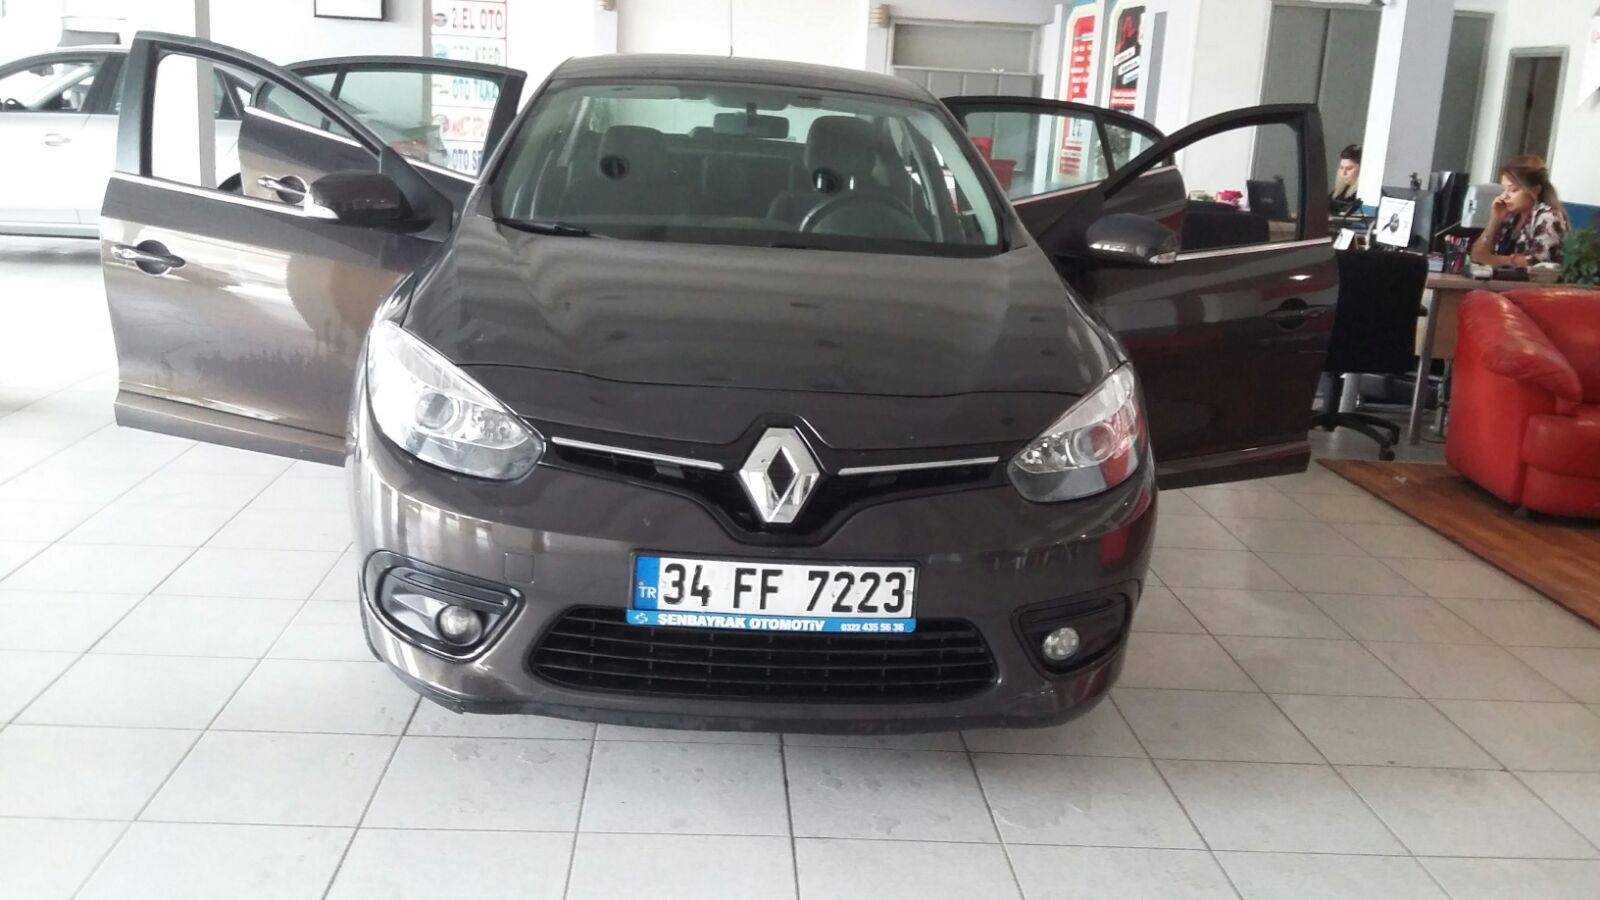 34 FF 7223 - - 2016 Renault Fluence 1.5 dCi Touch 